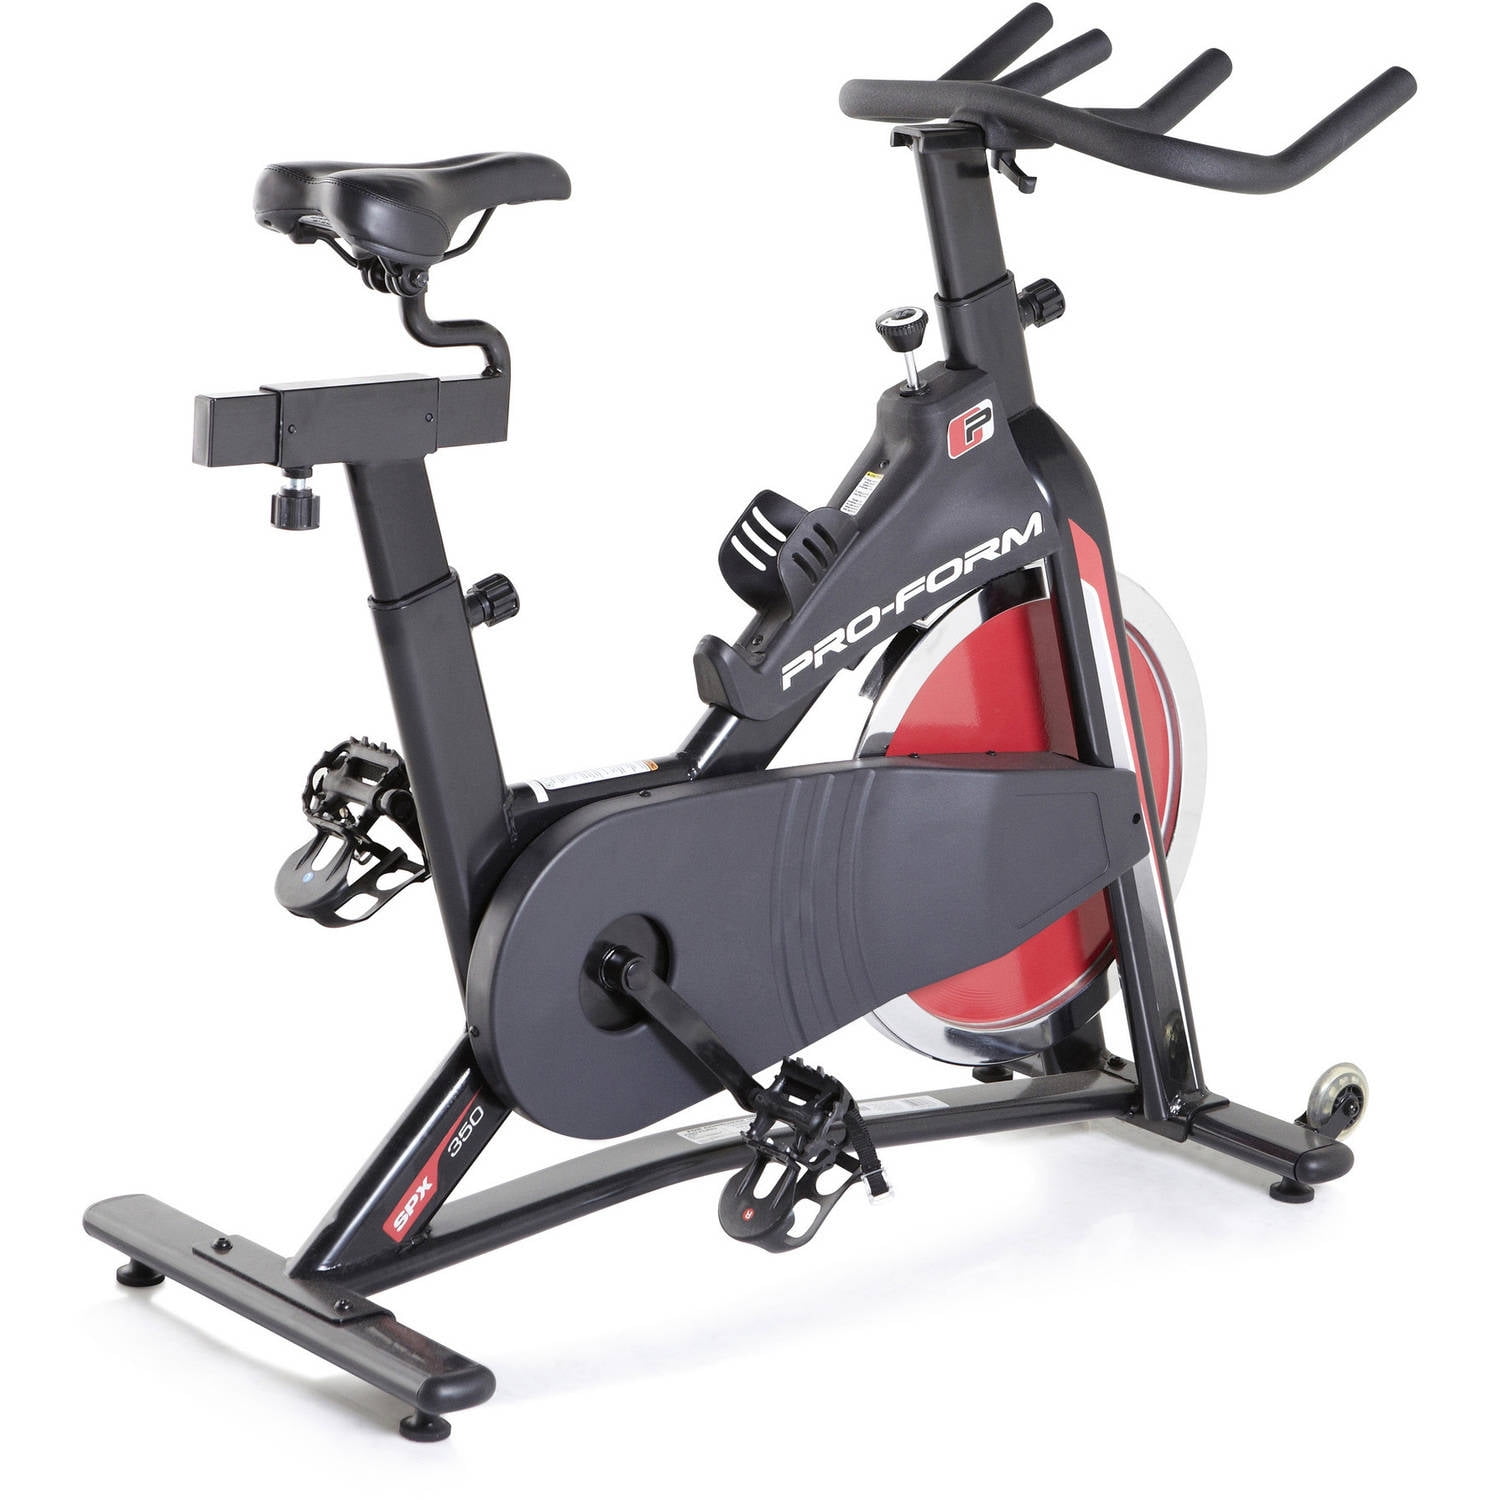 Proform Exercise Bikes with regard to cycling vs treadmill intended for Household